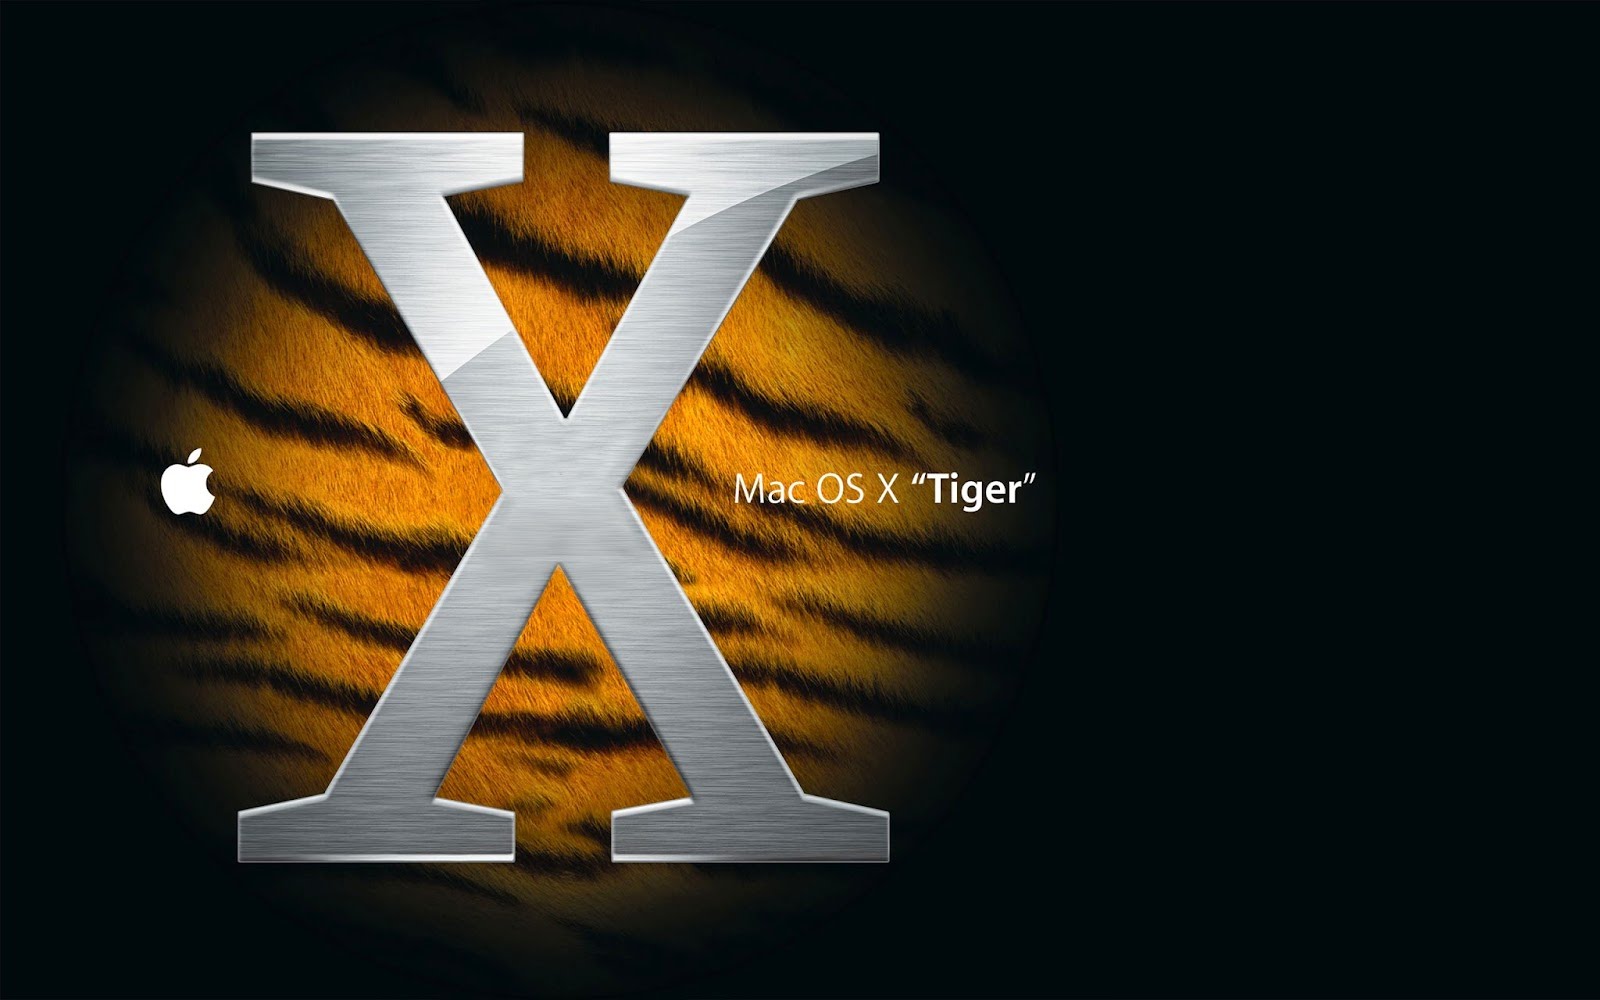 vlc player for mac os 10.6.8